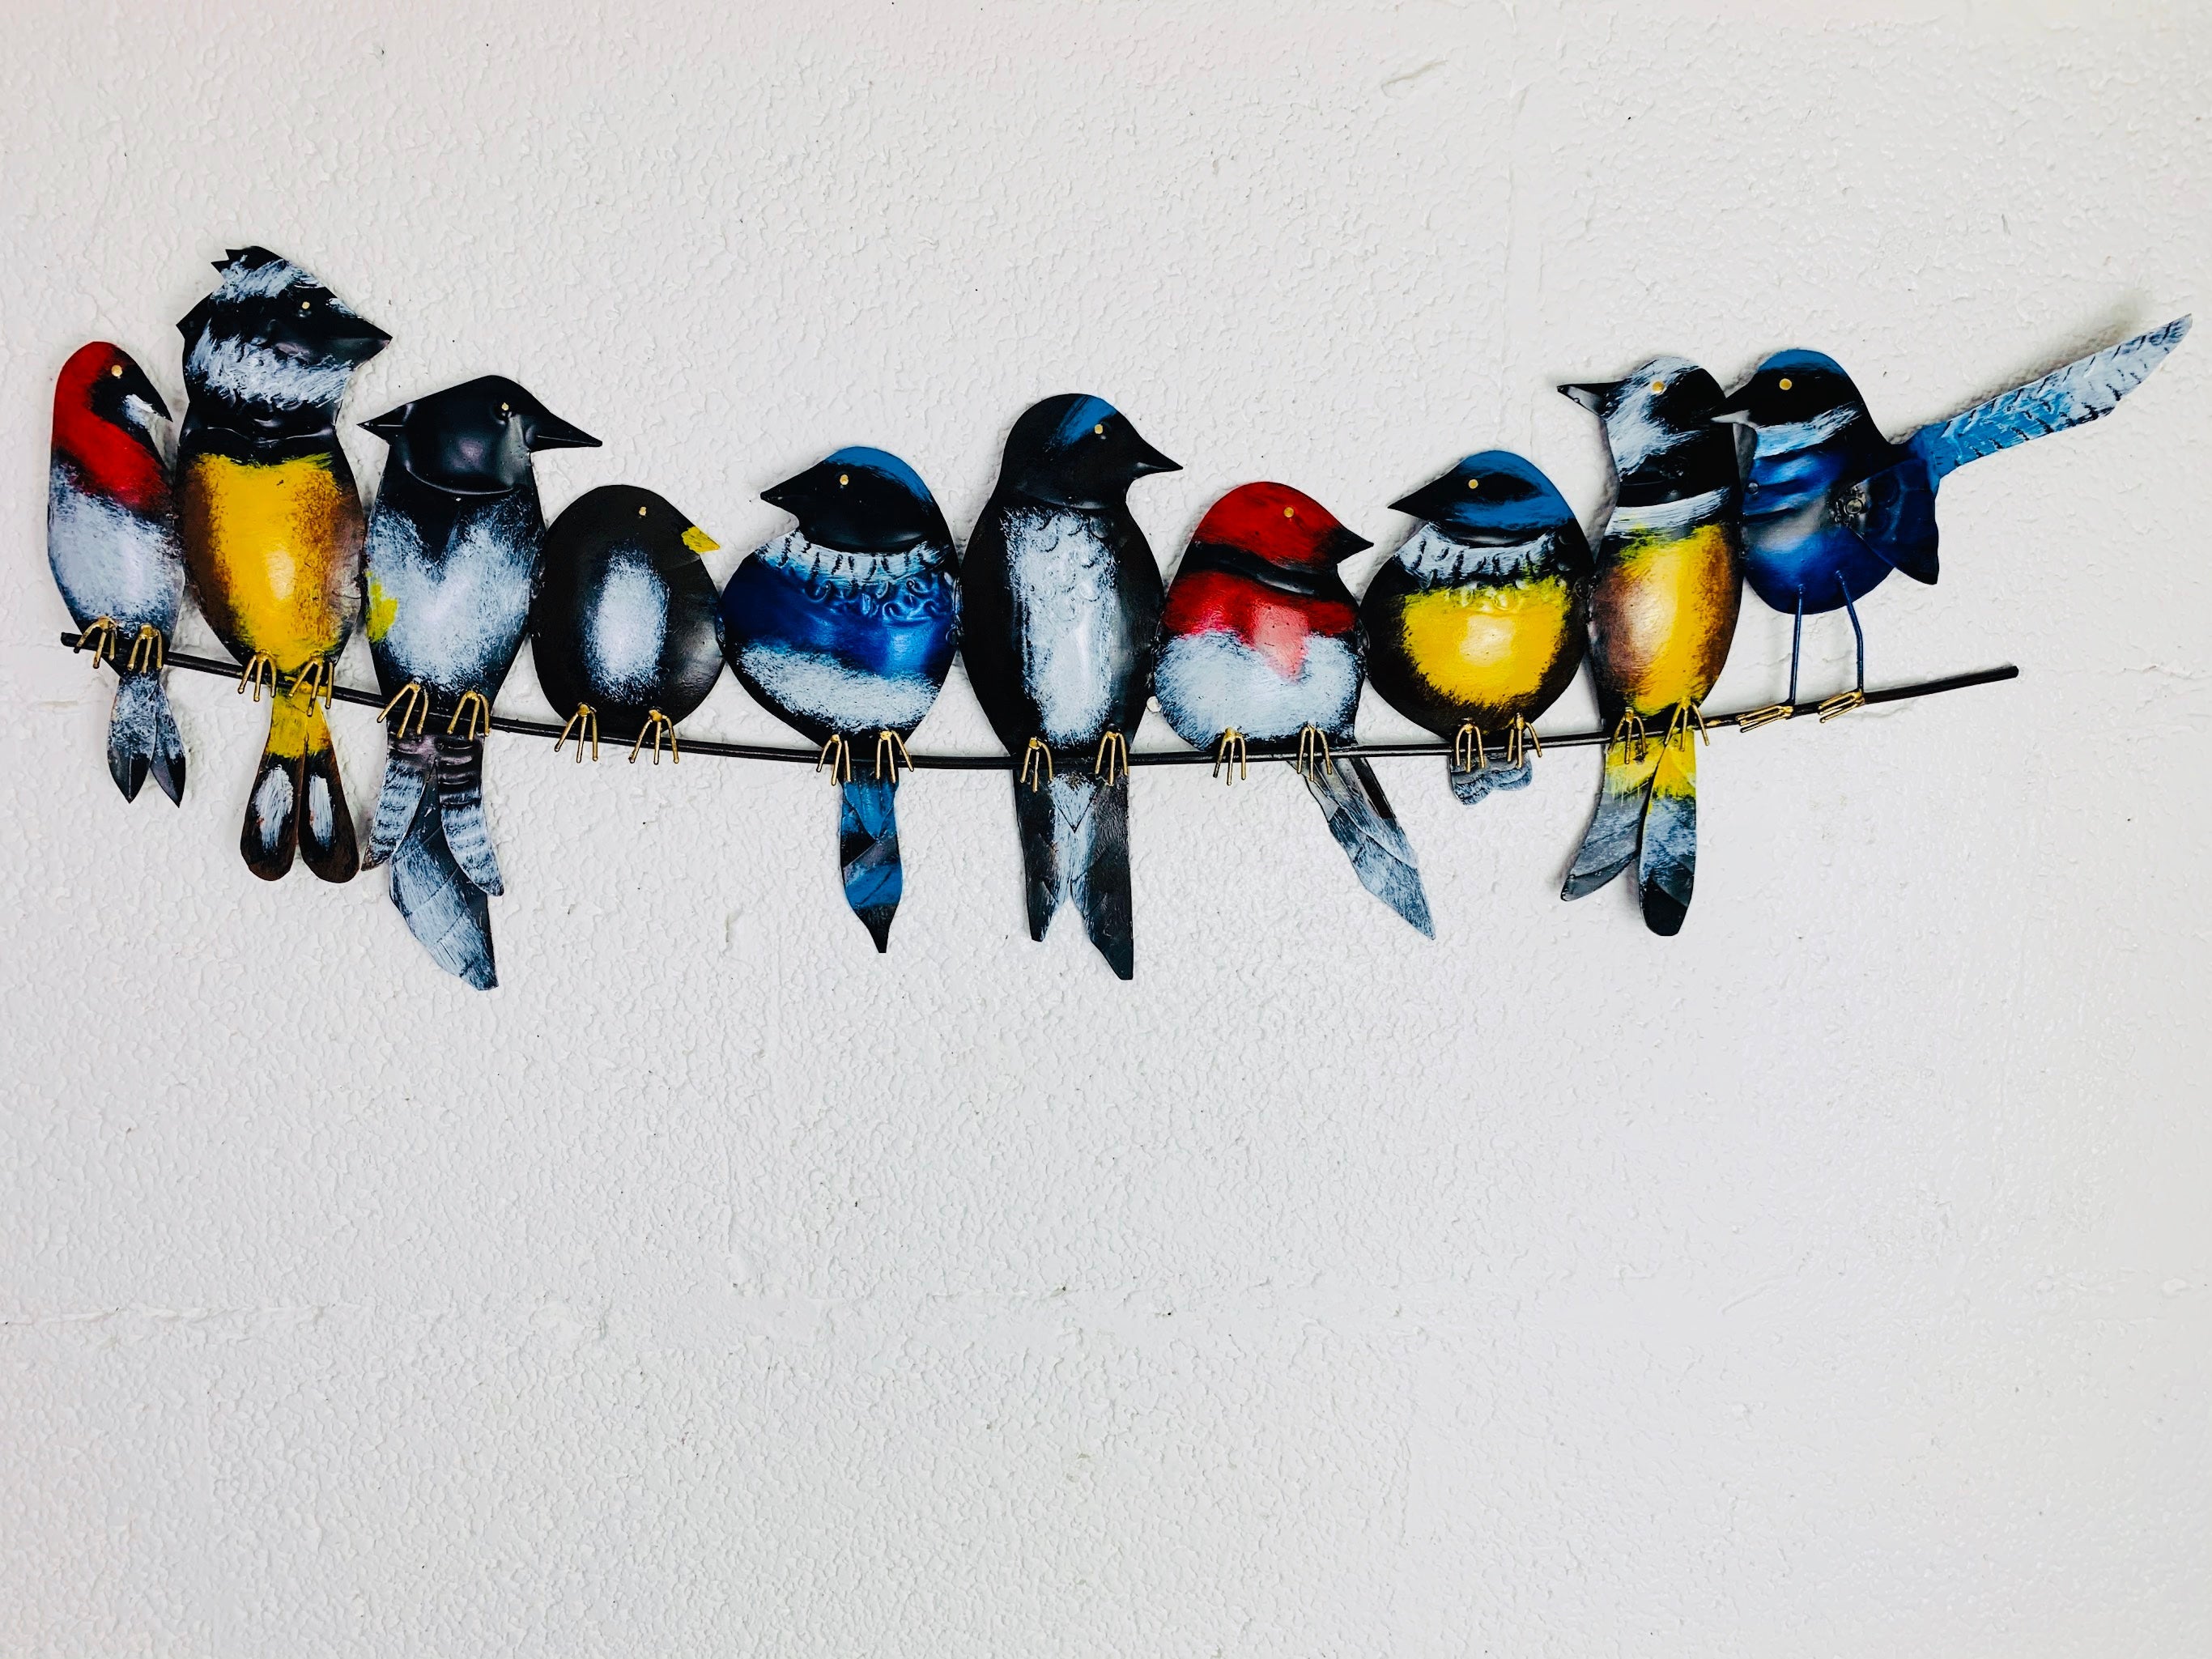 front view of metal birds on a wire hung on white wall